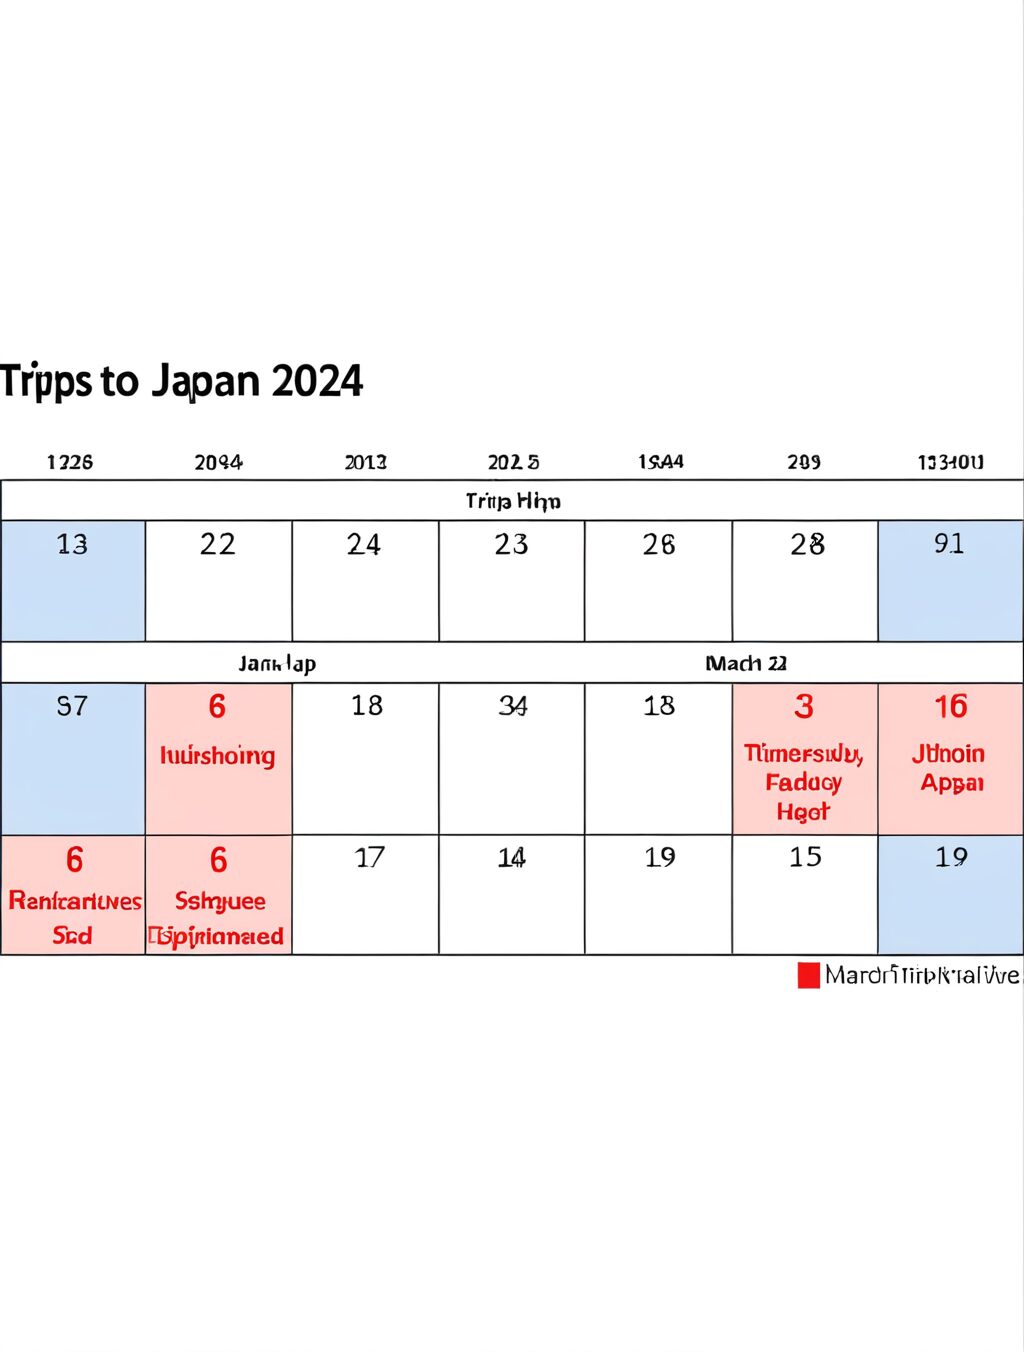 trips to japan march 2024